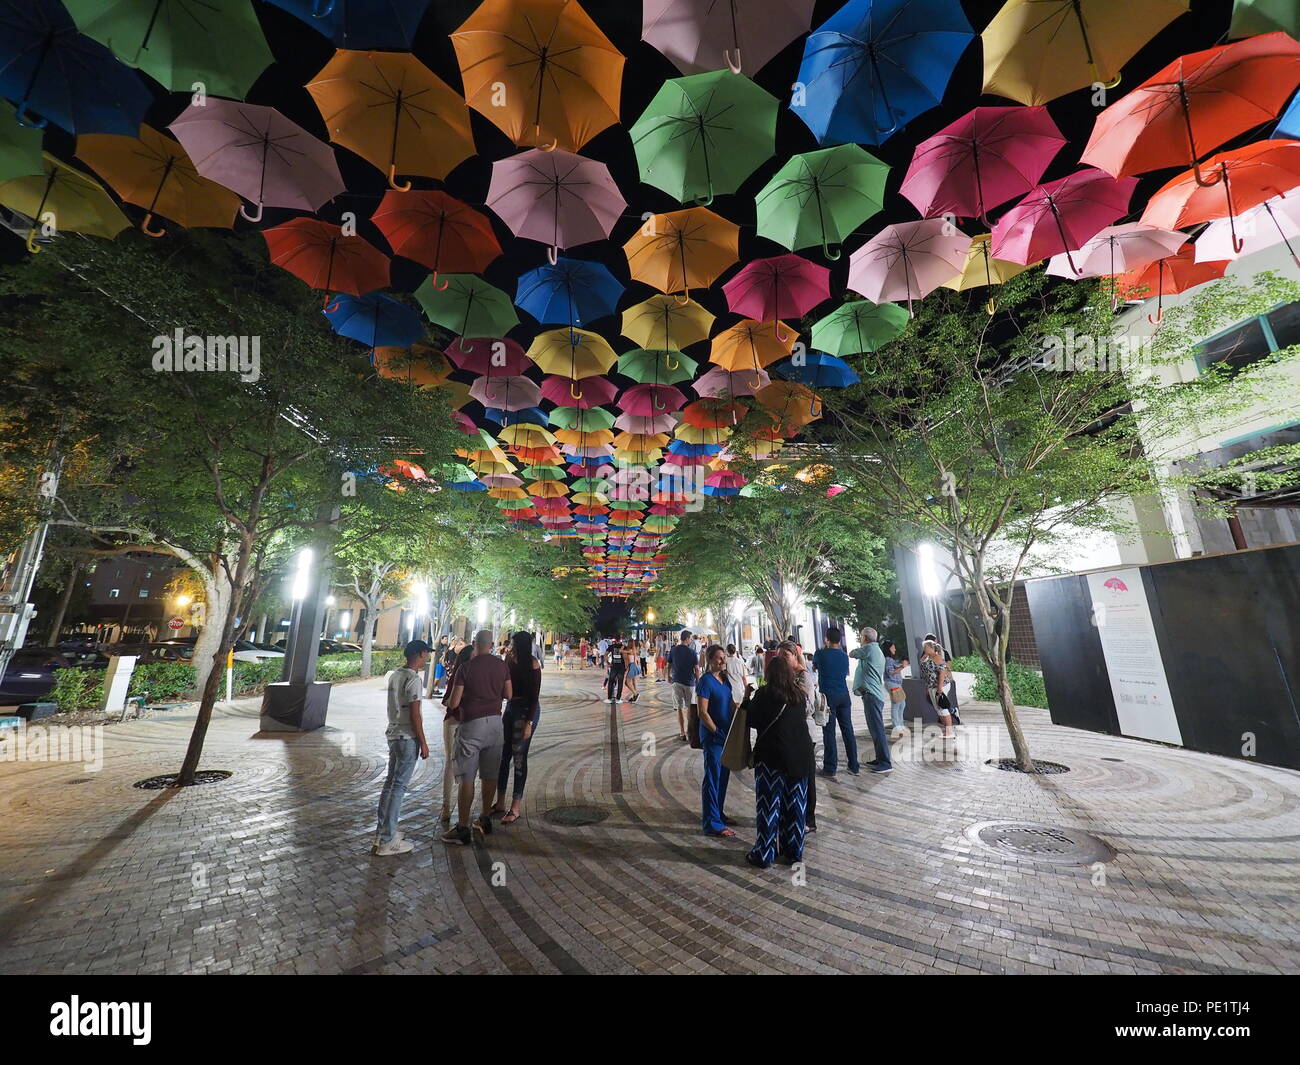 Umbrella Sky in Coral Gables, Florida, a joint art project by the City of Coral Gables and the Portuguese company Sextafeira, at night.. Stock Photo